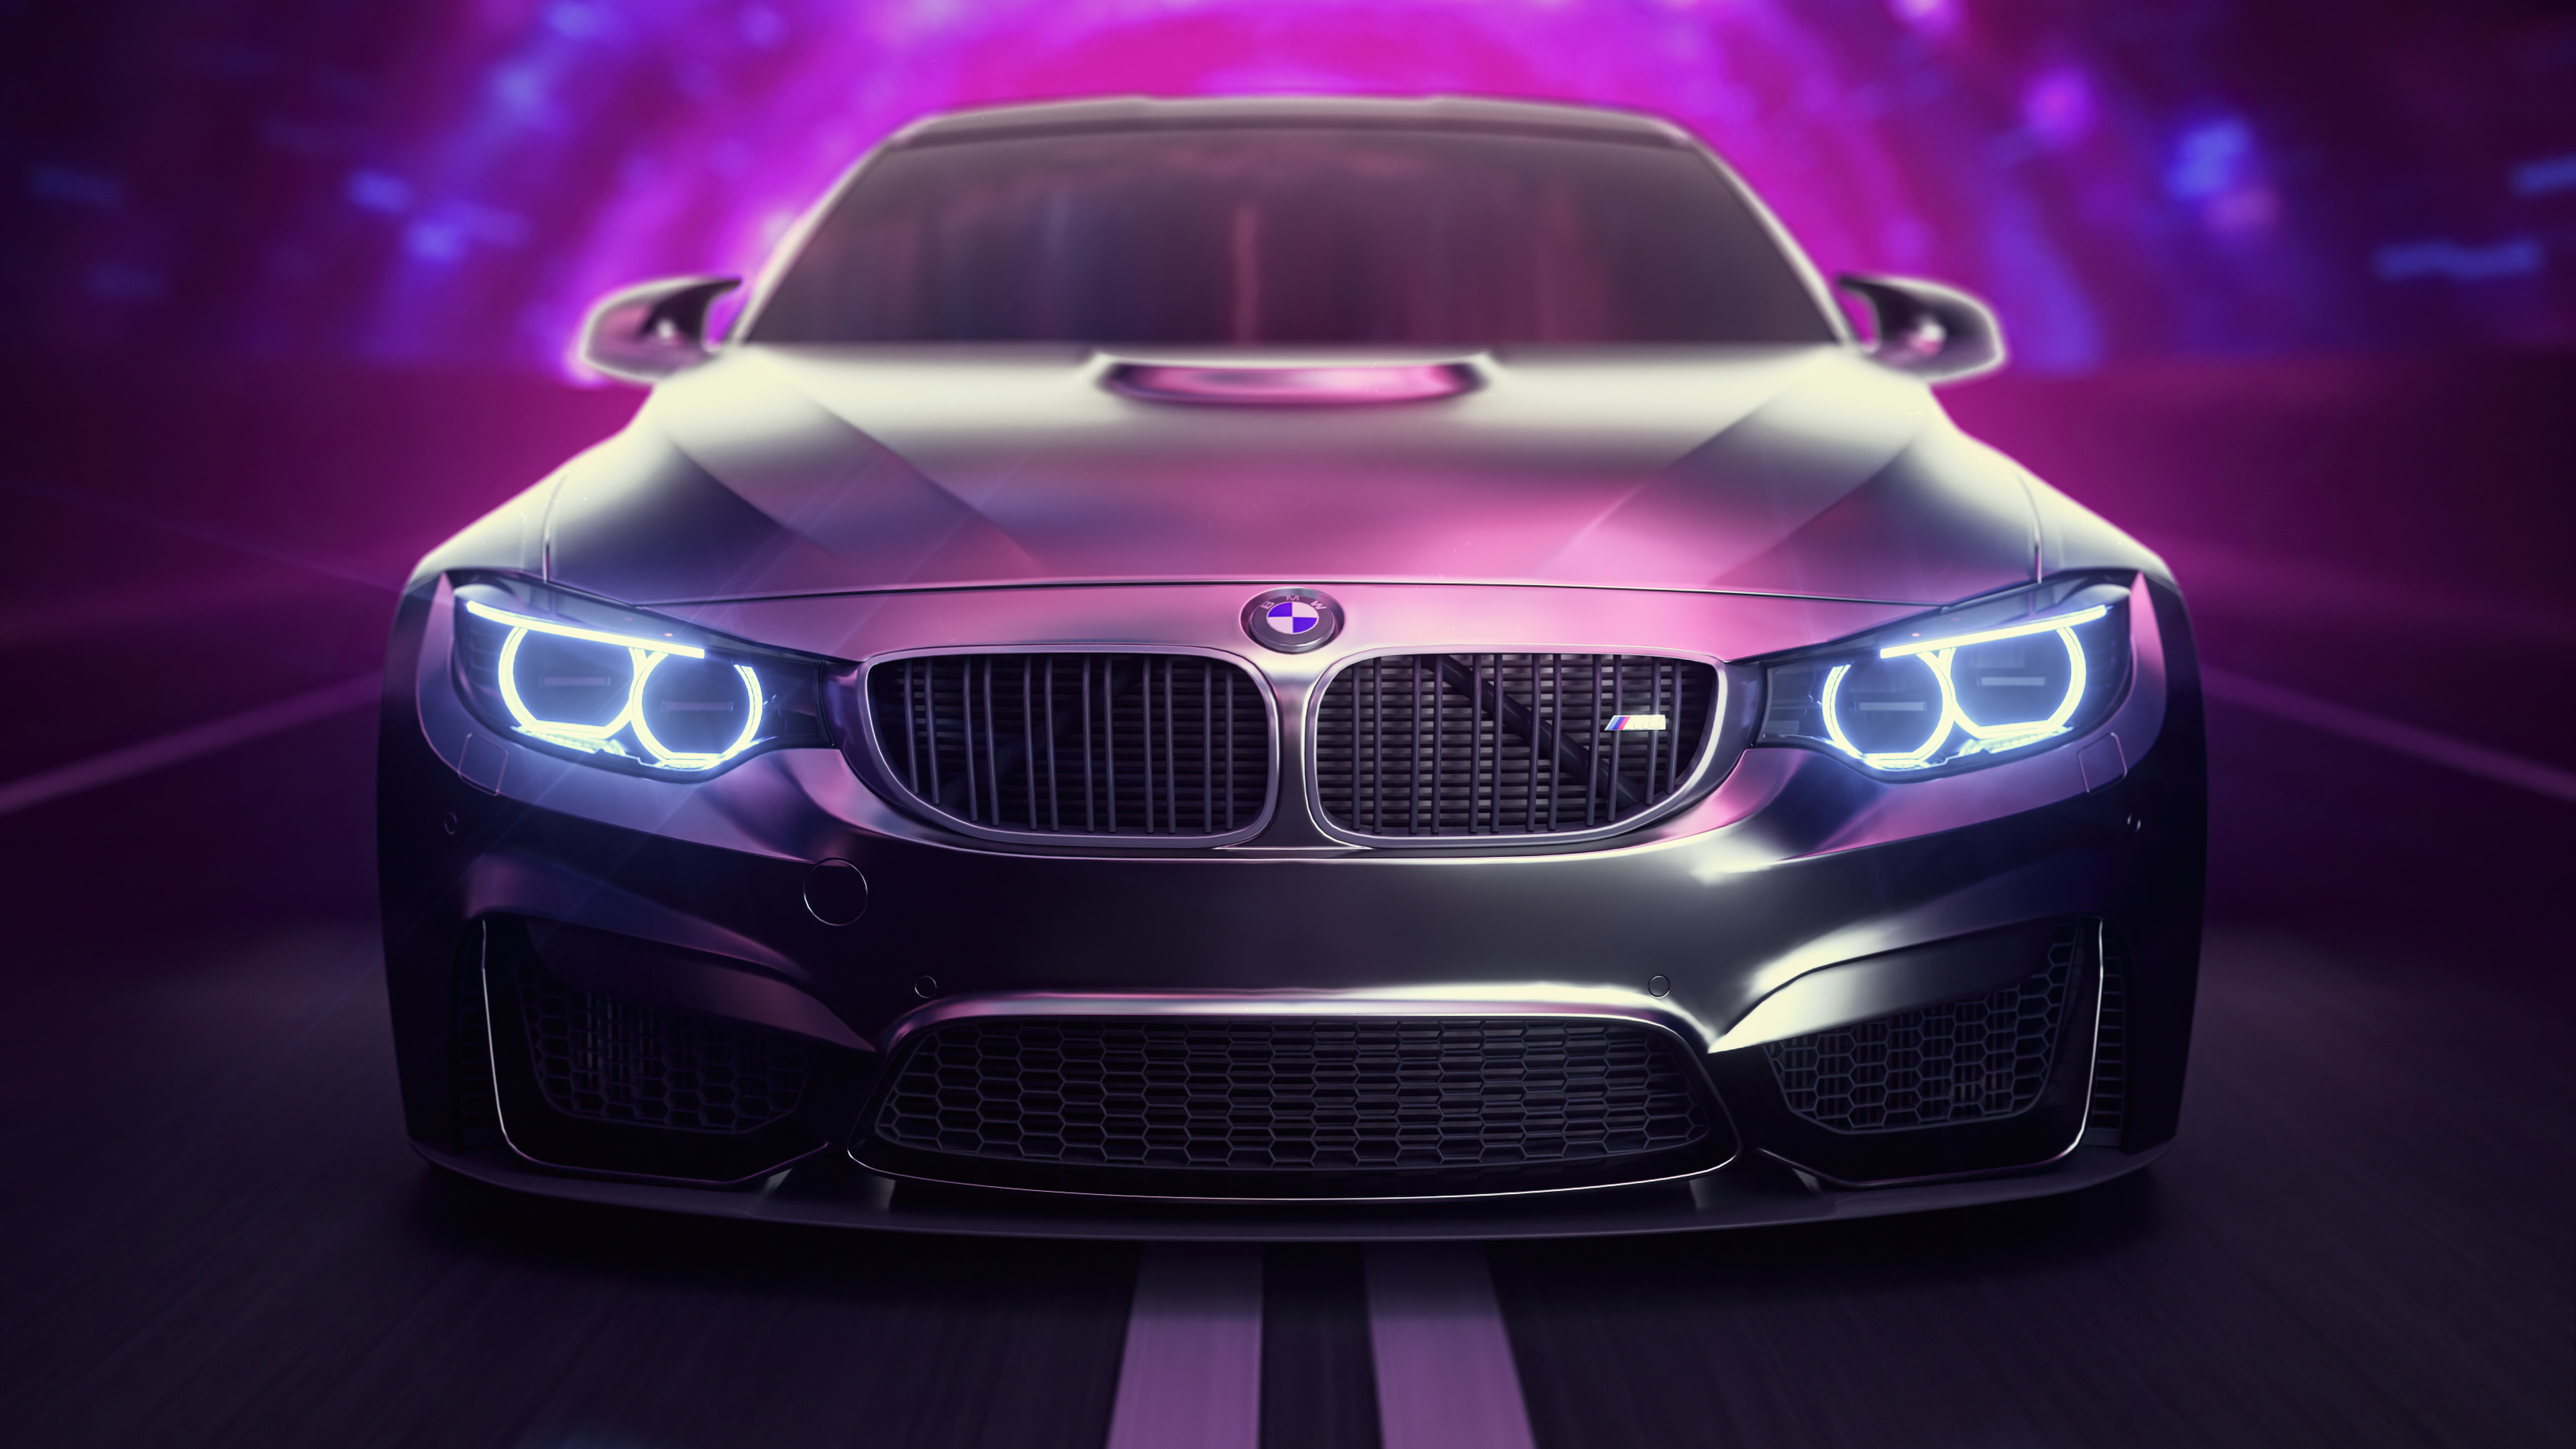 Bmw m speed of light hd cars k wallpapers images backgrounds photos and pictures